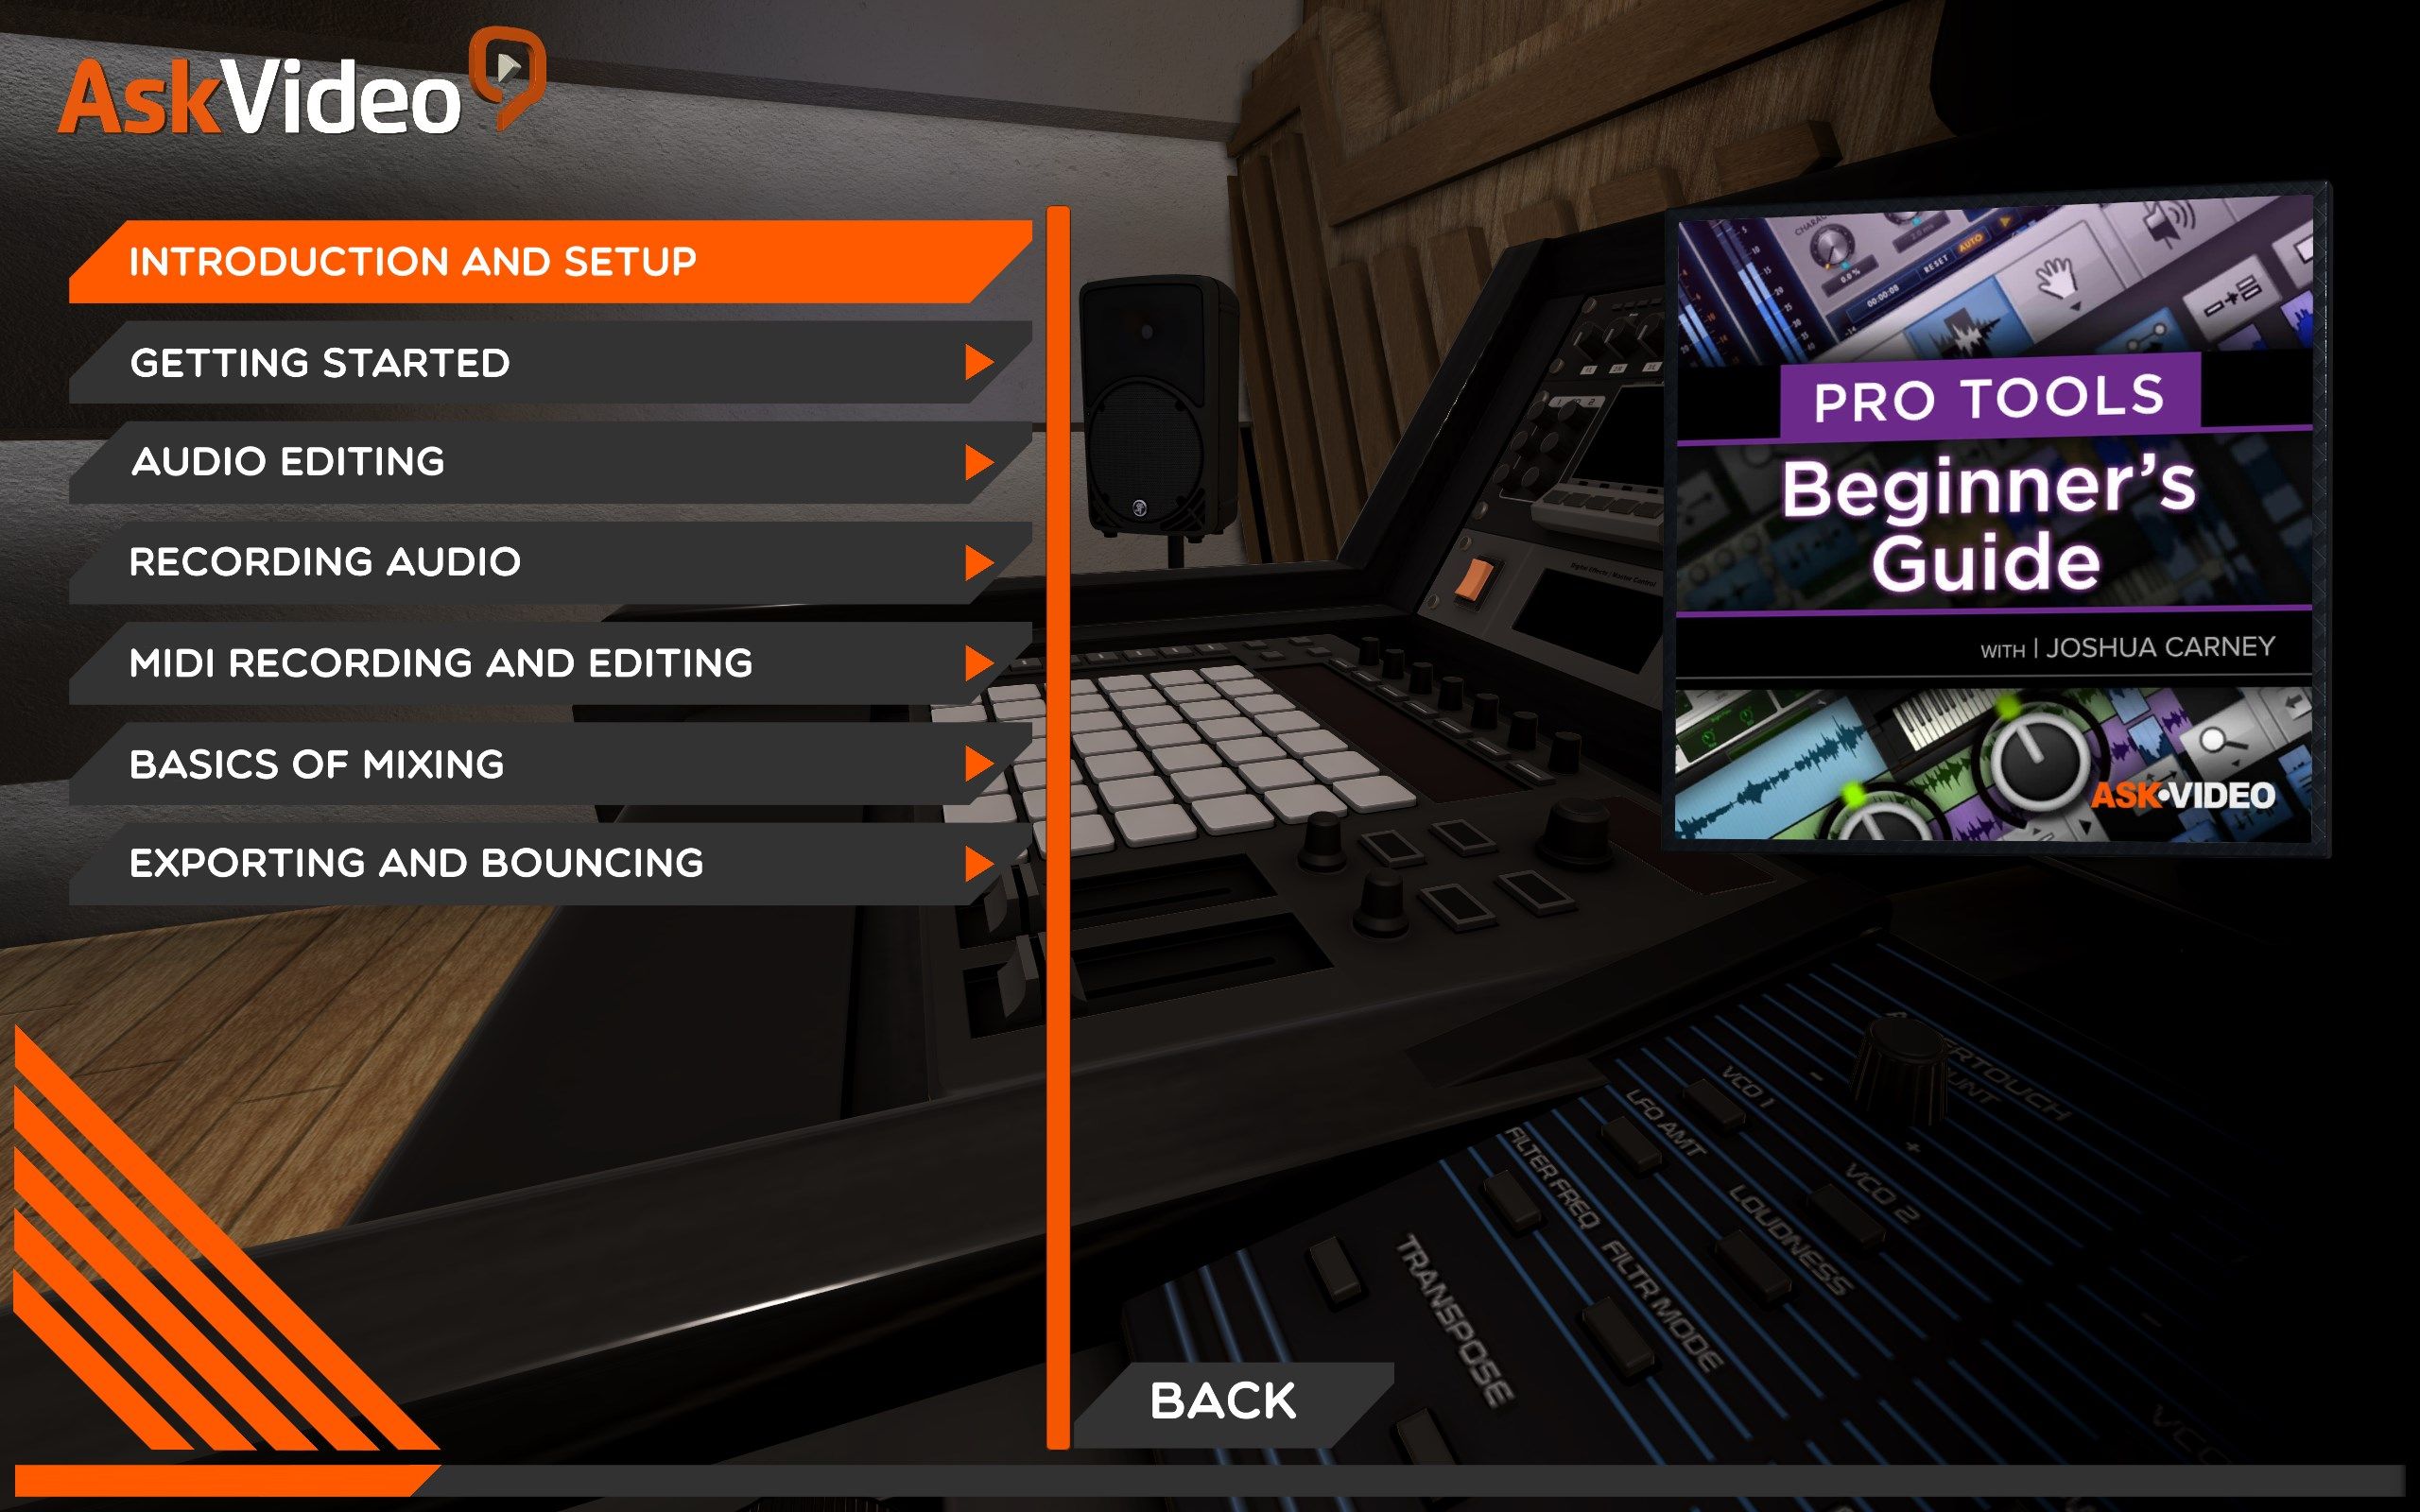 Beginner's Guide to Pro Tools 2021